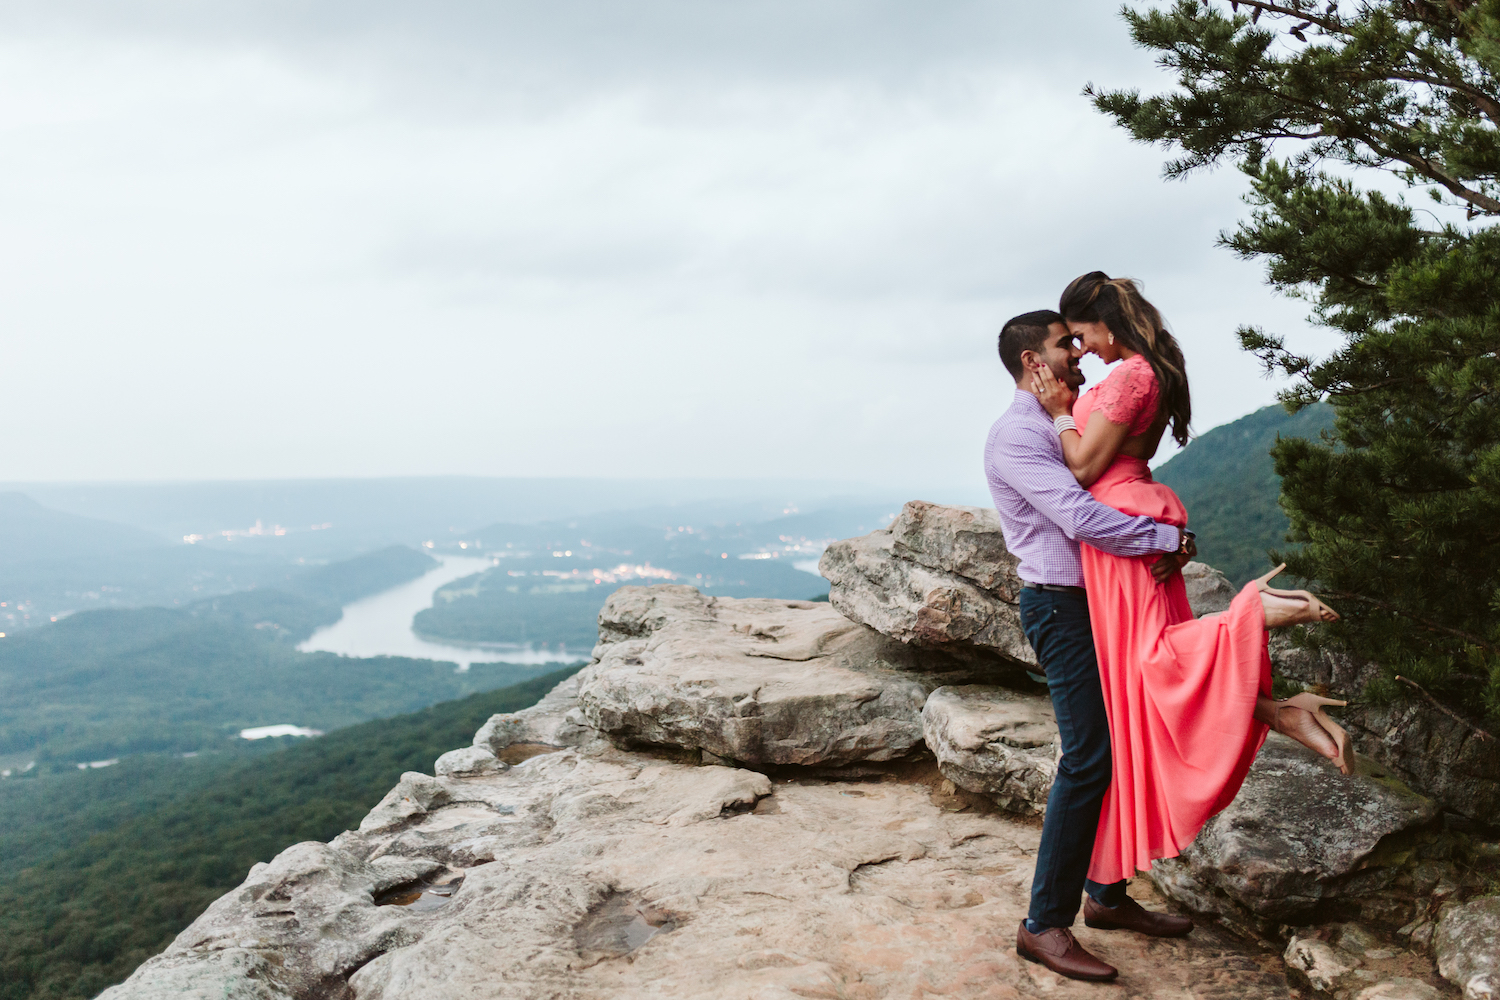 man carries woman on Sunset Rock on Lookout Mountain near Chattanooga and she leans her head down toward him